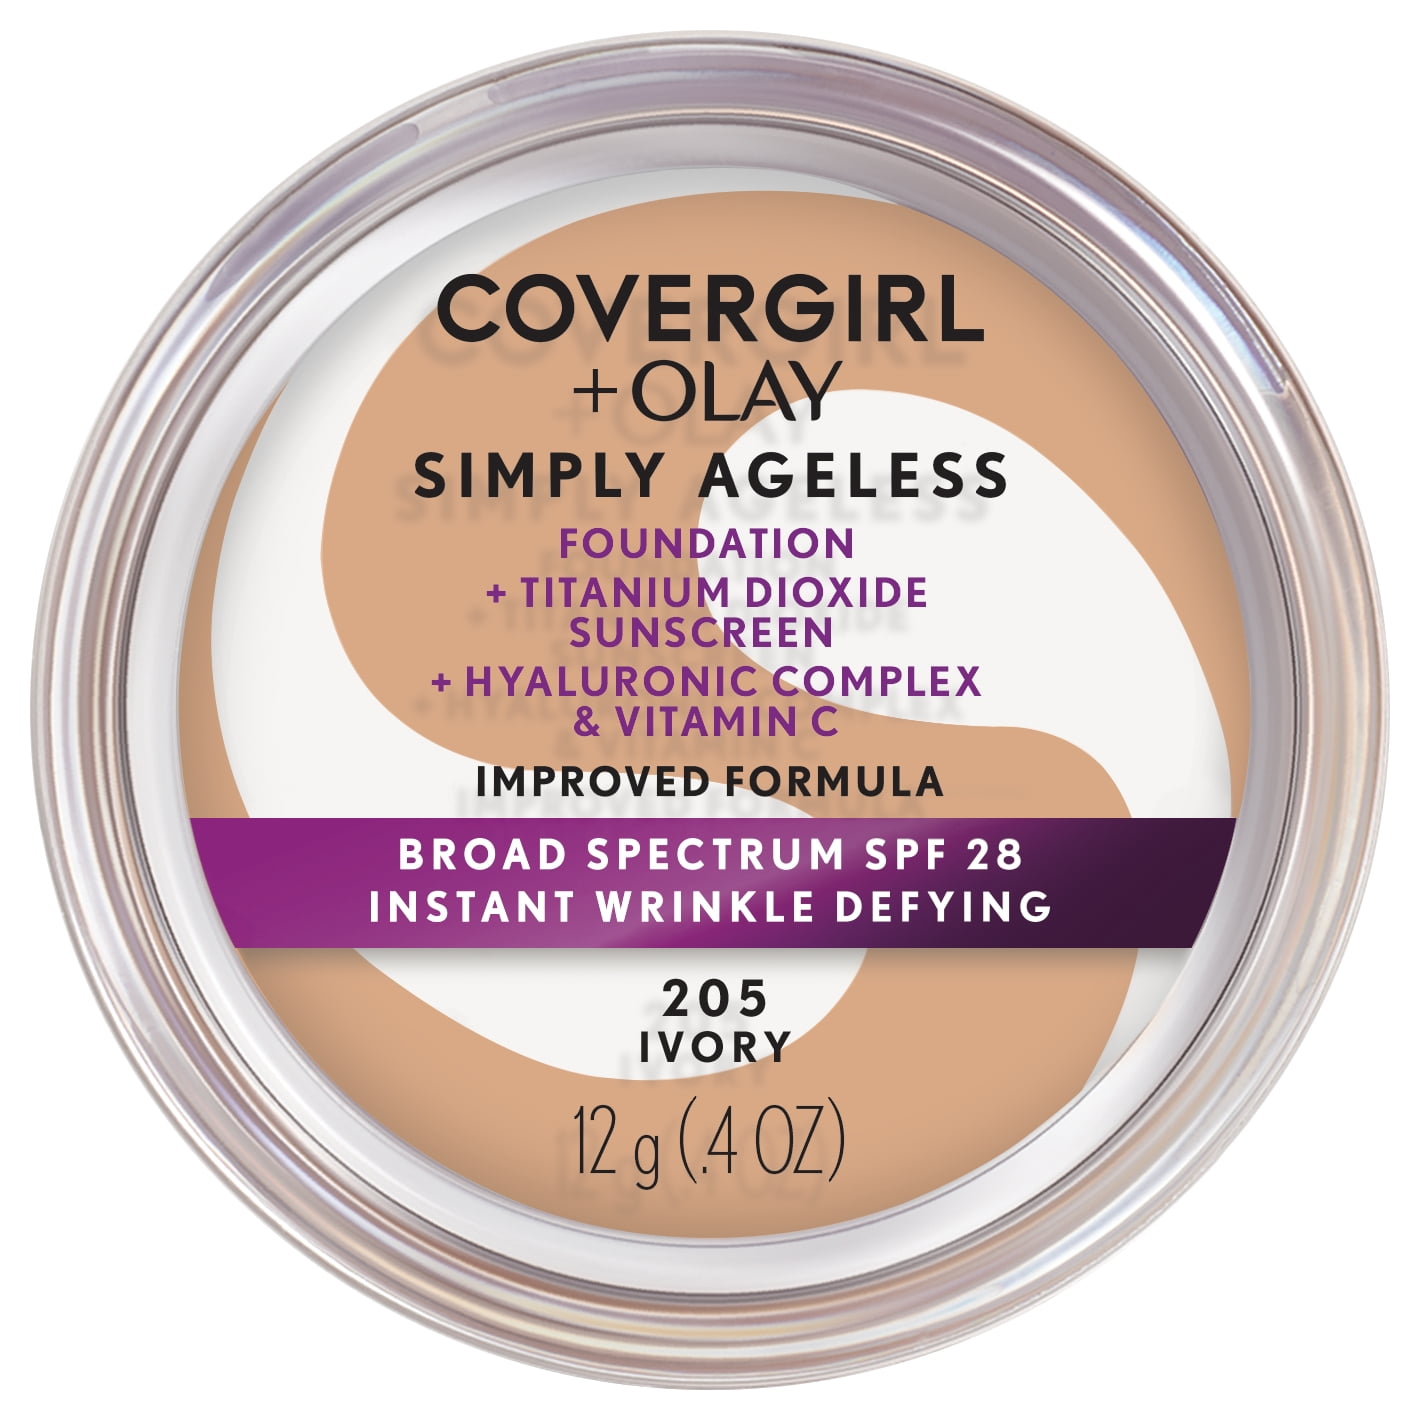 COVERGIRL + OLAY Simply Ageless Instant Wrinkle-Defying Foundation with SPF 28, Ivory 205, 0.44 oz, Hydrating Anti-Aging Foundation, Cruelty-Free Foundation, Hyaluronic Complex for Firm Skin